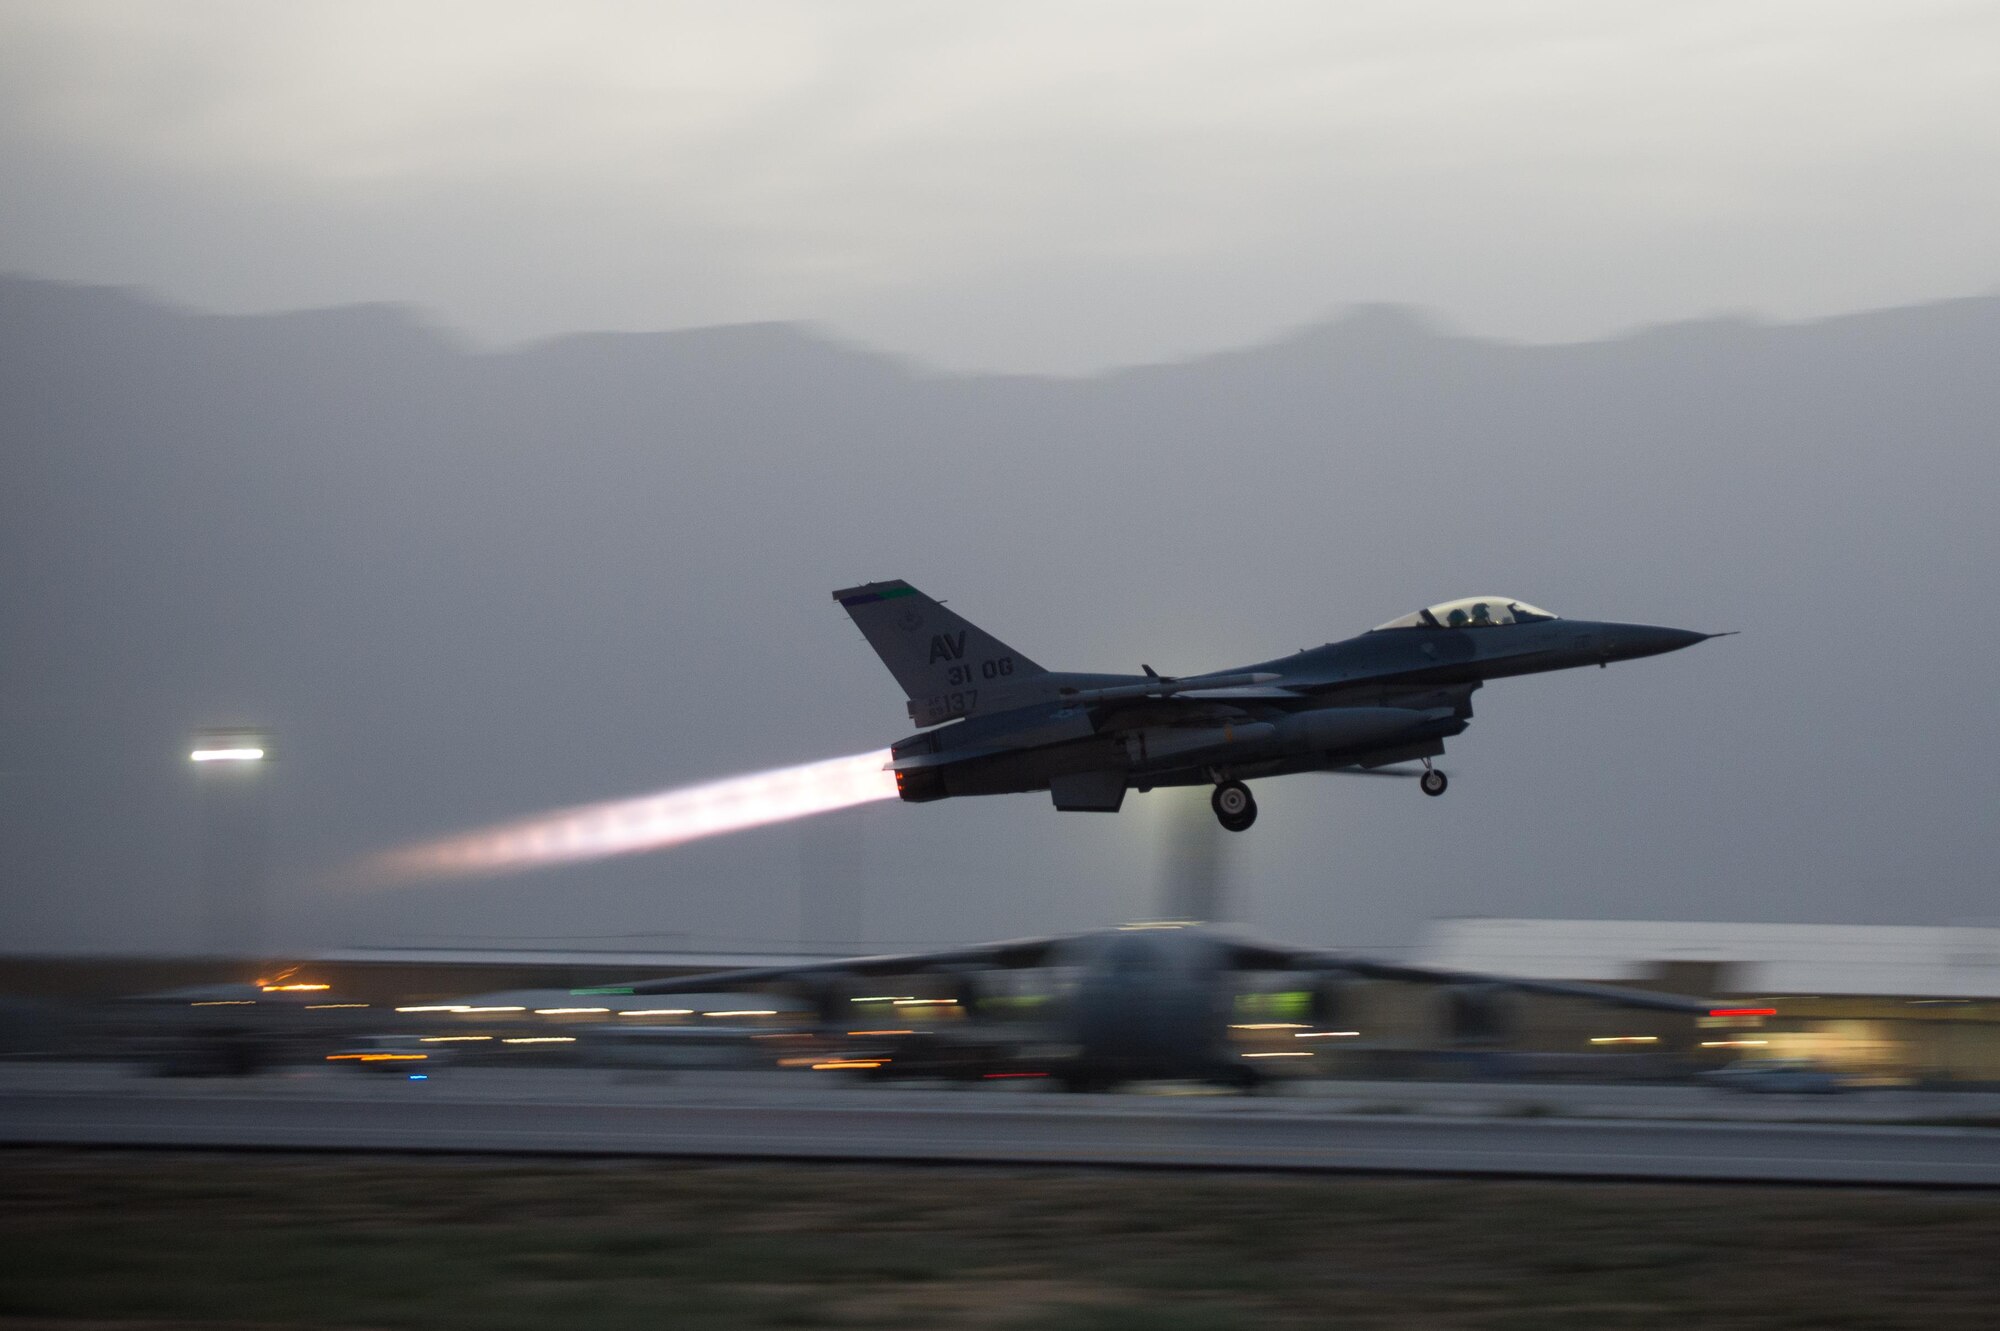 U.S. Air Force Capt. Doug Mayo, 555th Expeditionary Fighter Squadron, pilots an F-16 Fighting Falcon aircraft during takeoff from Bagram Airfield, Afghanistan, June 8, 2015. Before takeoff Staff Sgt. William Harris, 455th Expeditionary Maintenance Squadron crew chief, performed a preflight inspection on the aircraft to ensure it was ready to fly the combat sortie.  (U.S. Air Force photo by Tech. Sgt. Joseph Swafford/Released)